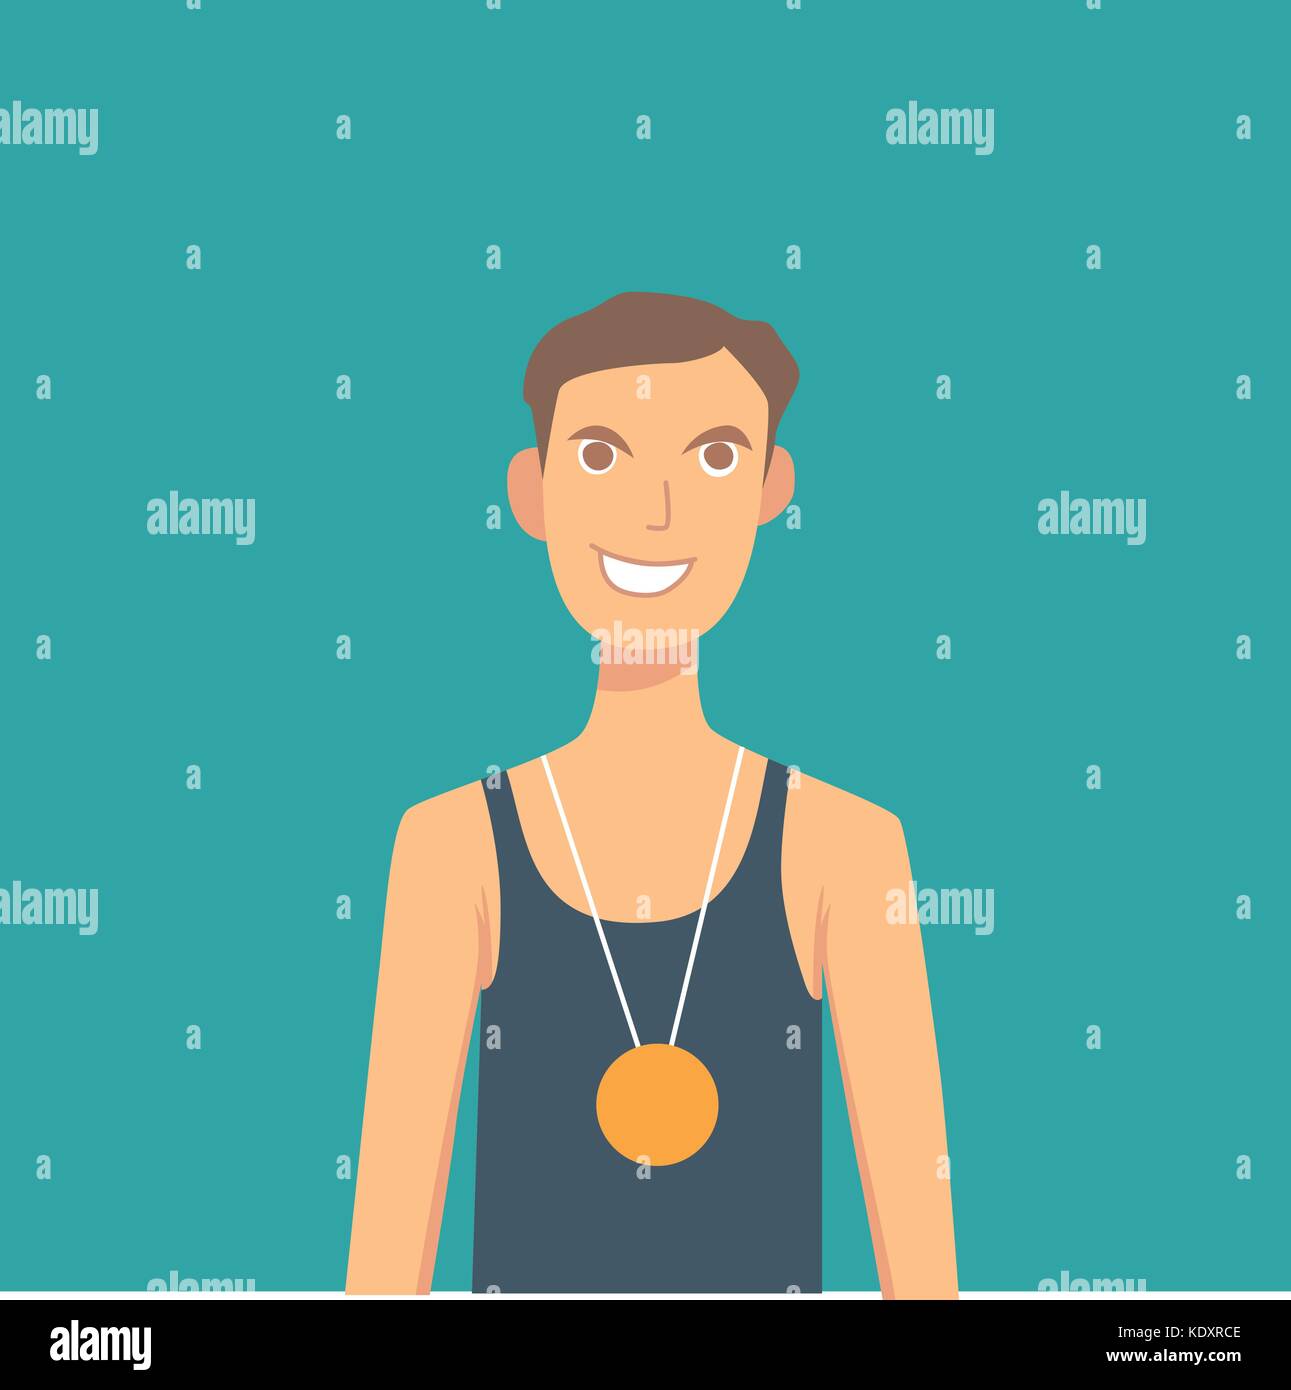 Athlete champion with medal, vector illustration Stock Vector